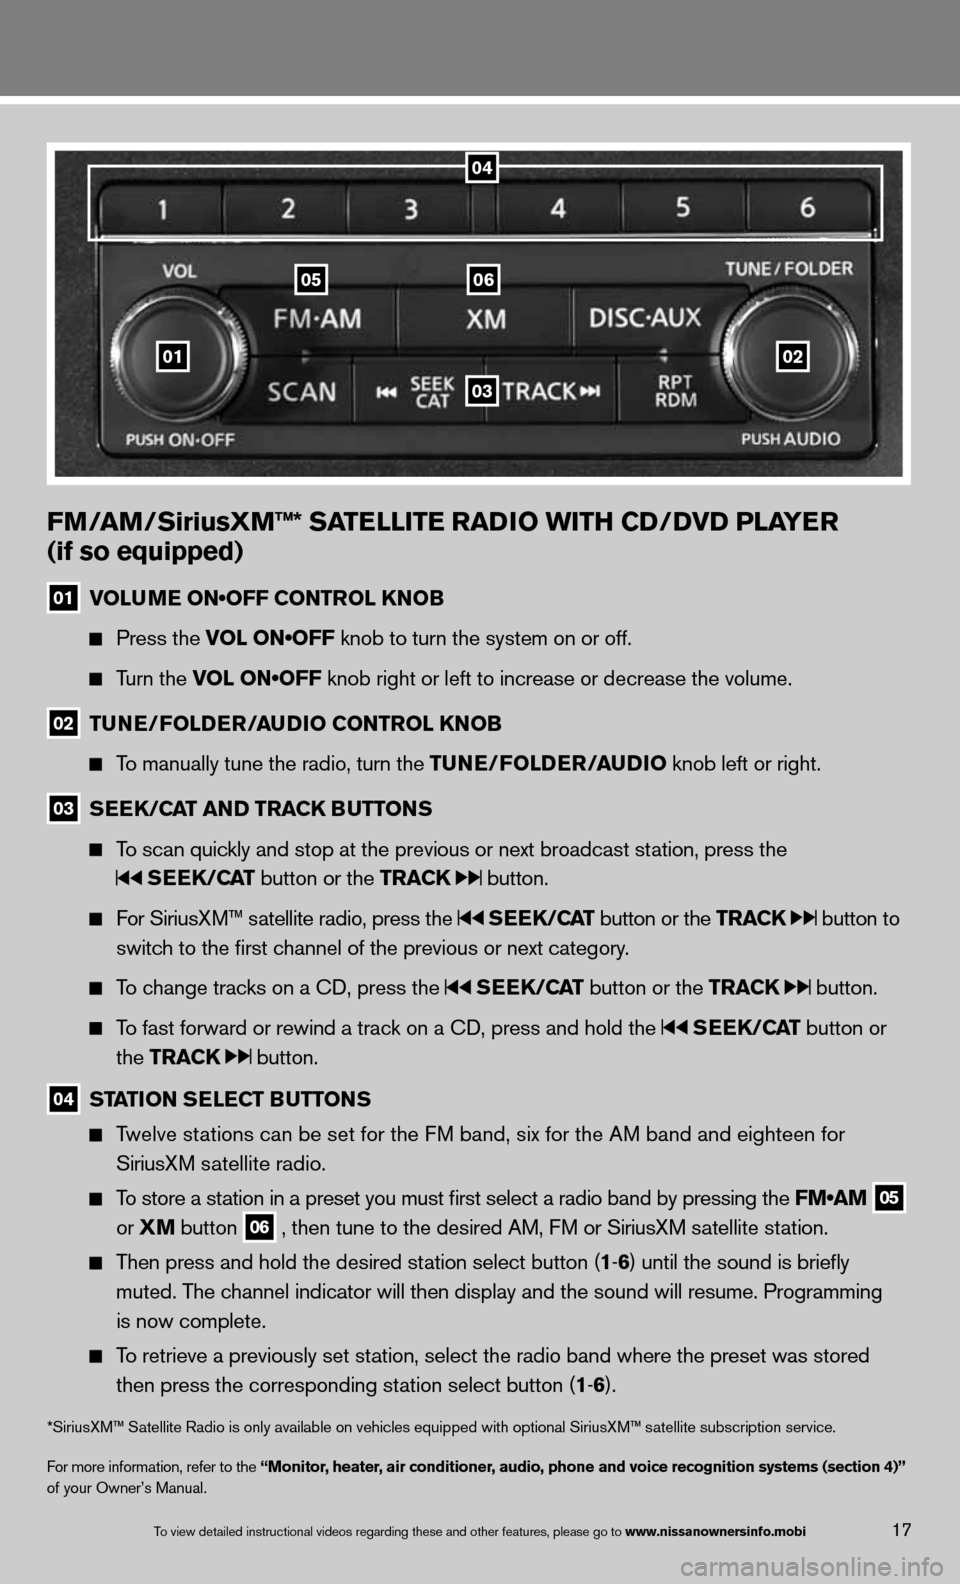 NISSAN QUEST 2013 RE52 / 4.G Quick Reference Guide 01
0605
03
02
FM/aM/SiriusXM™* Sa TeLLITe raDIO wITH CD/DVD PLa Yer 
(if so equipped)
01  VOLUME ON•OFF CONTROL KNOB
  
  Press the VOL ON•OFF knob to turn the system on or off. 
  
  Turn the V